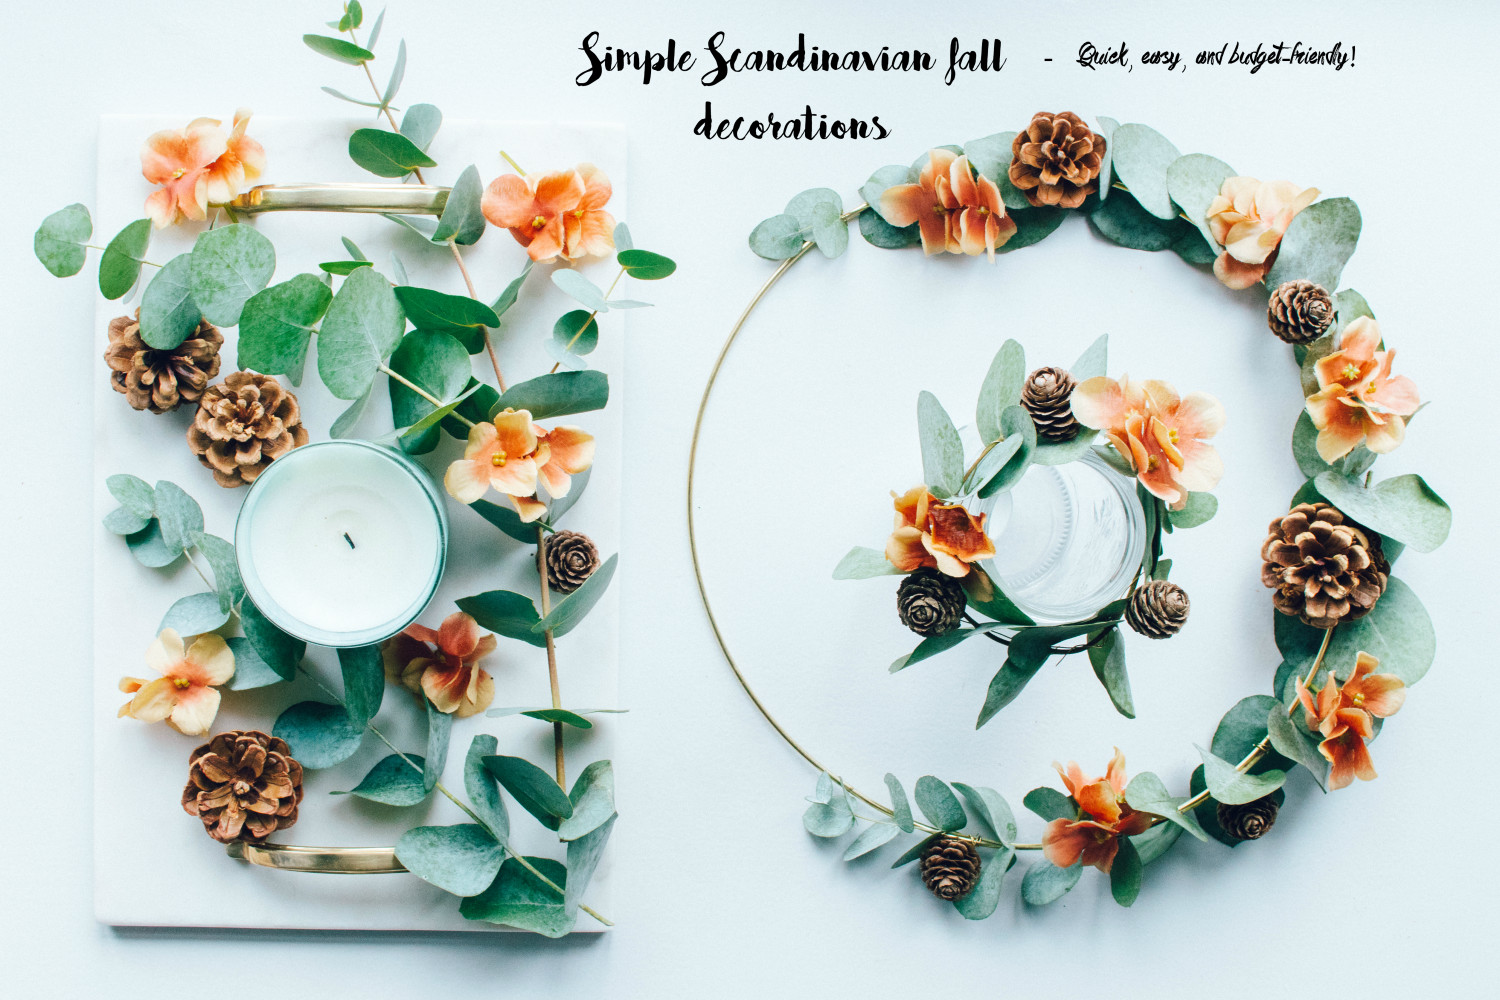 DIY // Simple Scandinavian fall decorations - Quick, easy and budget-friendly